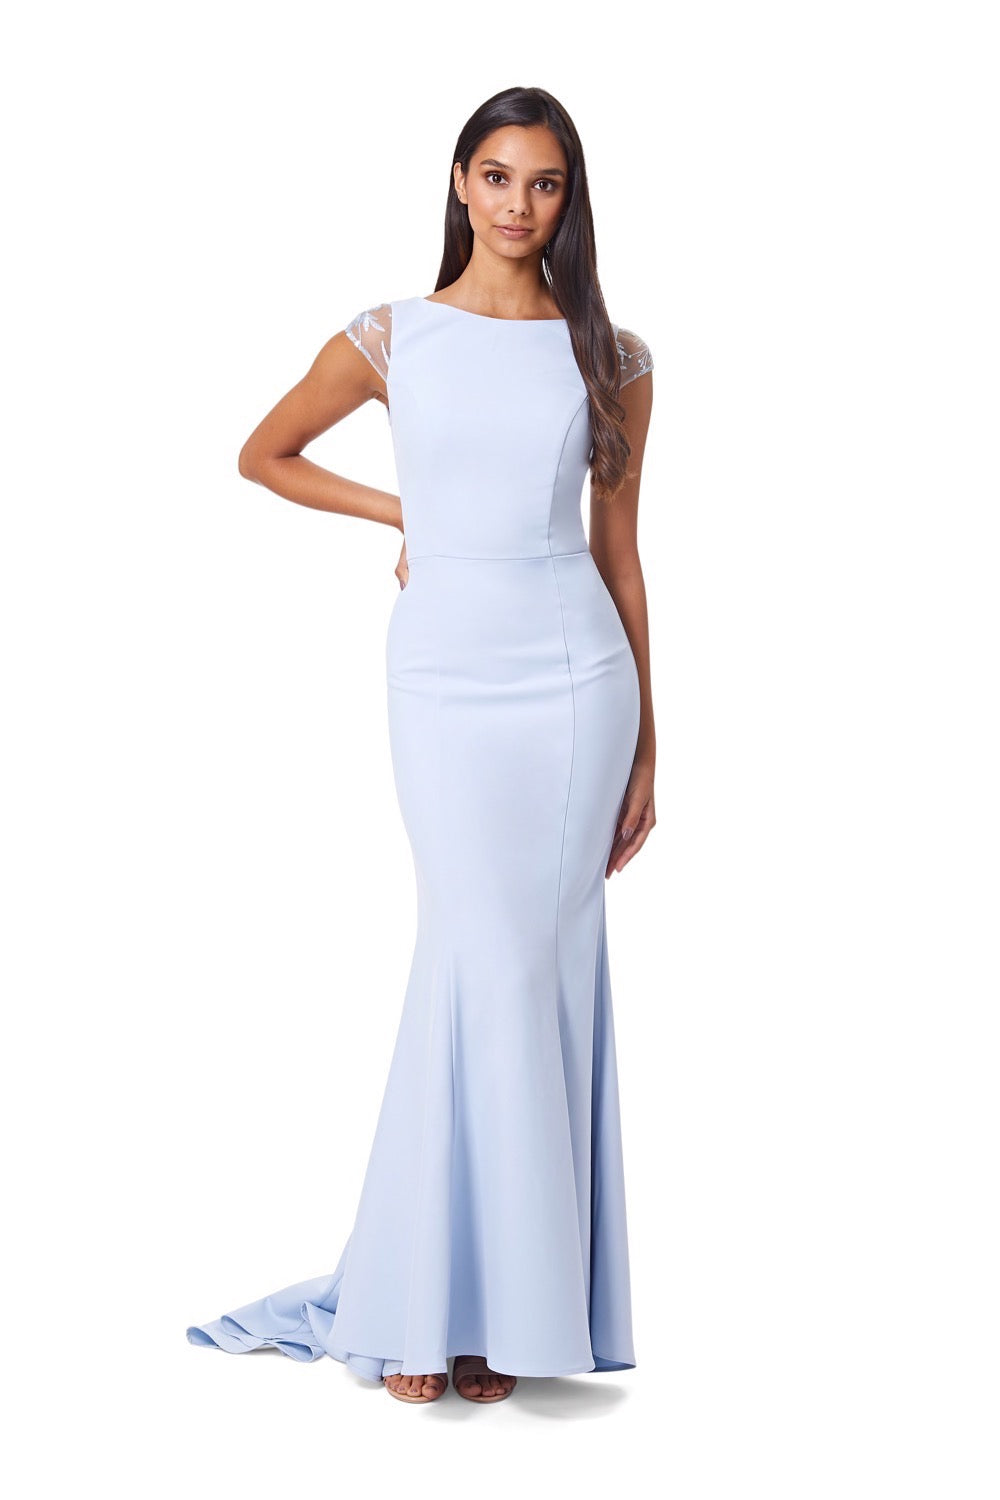 Masa Fishtail Maxi Dress with Lace Cap Sleeves and Embroidered Button Back, UK 16 / US 12 / EU 44 / Powder Blue